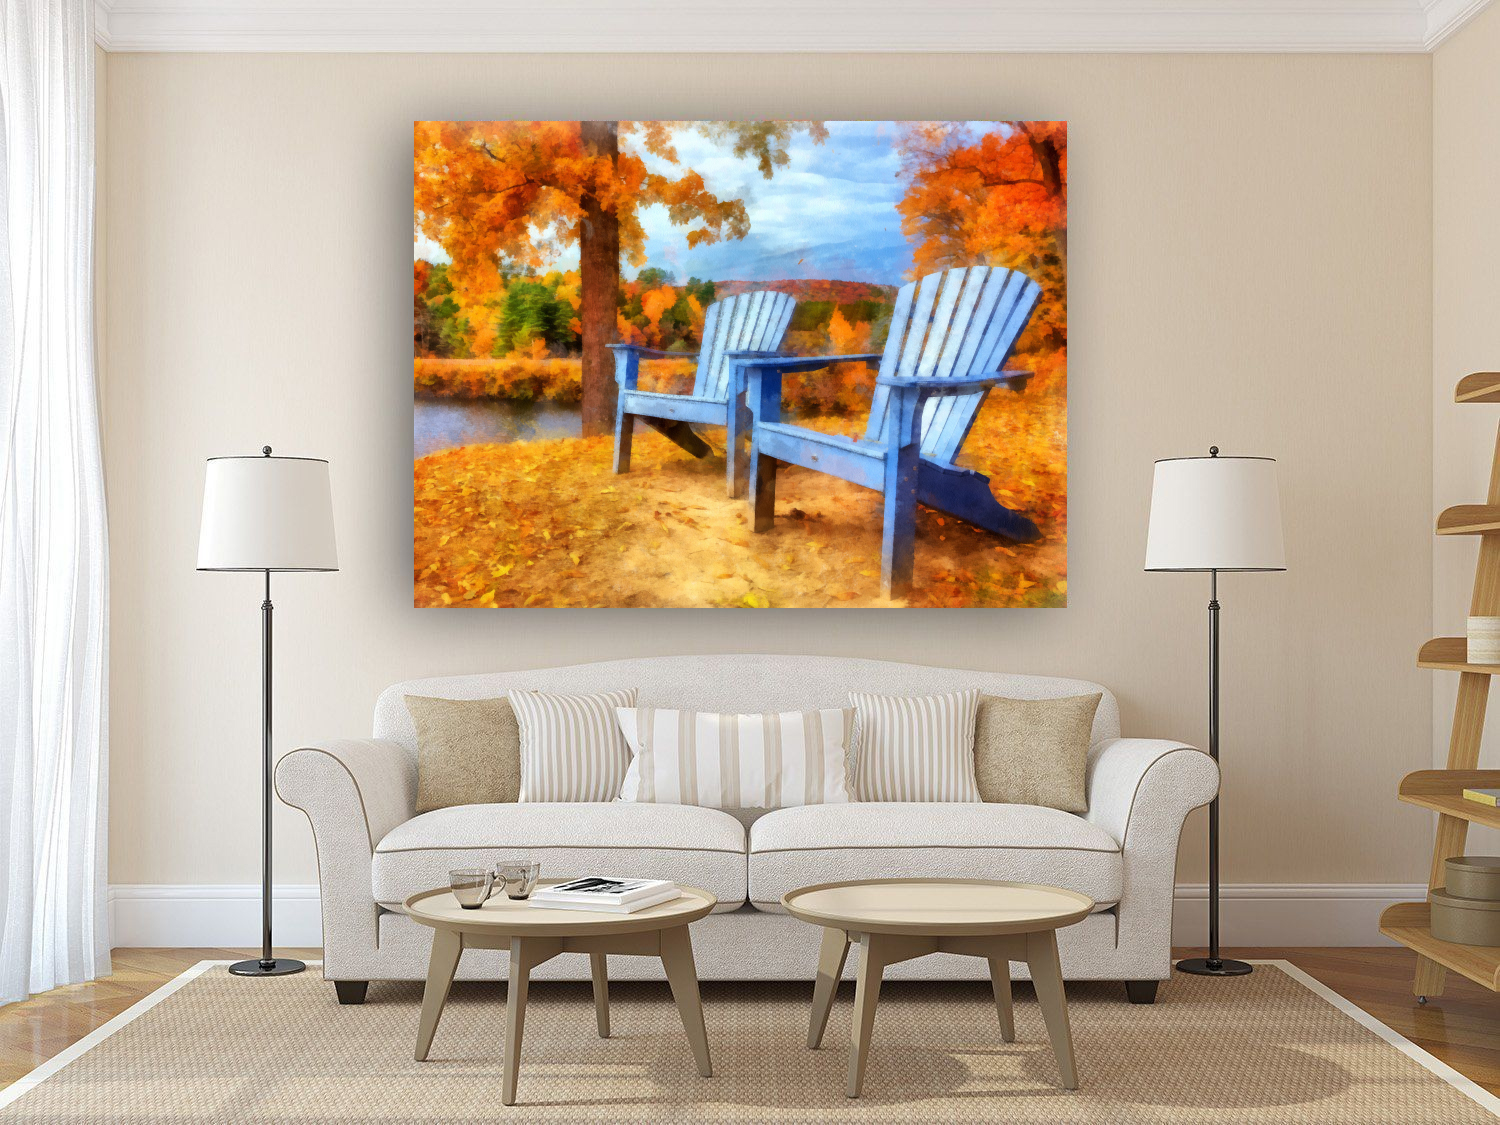 Amazing artwork for your home!